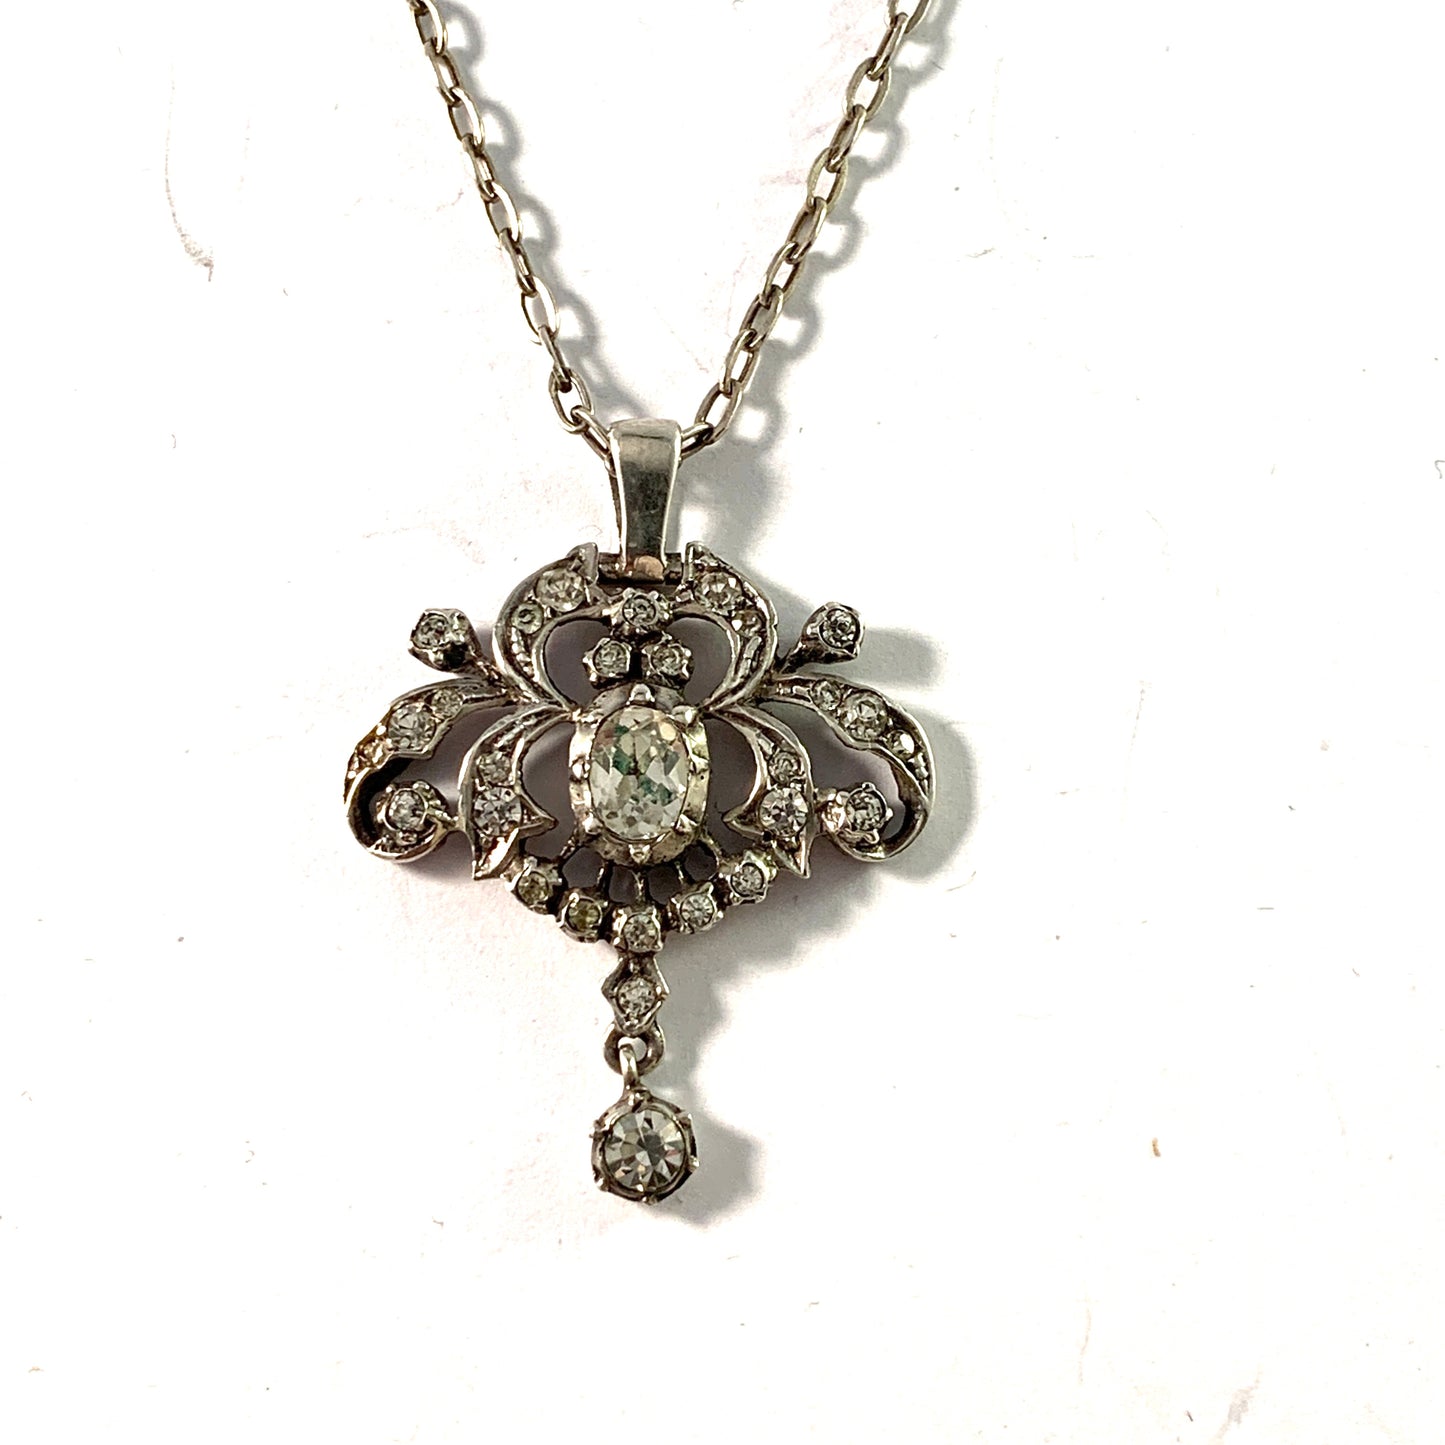 Germany / Austria 1930-40s Solid 835 Silver Paste Stone Pendant Necklace.